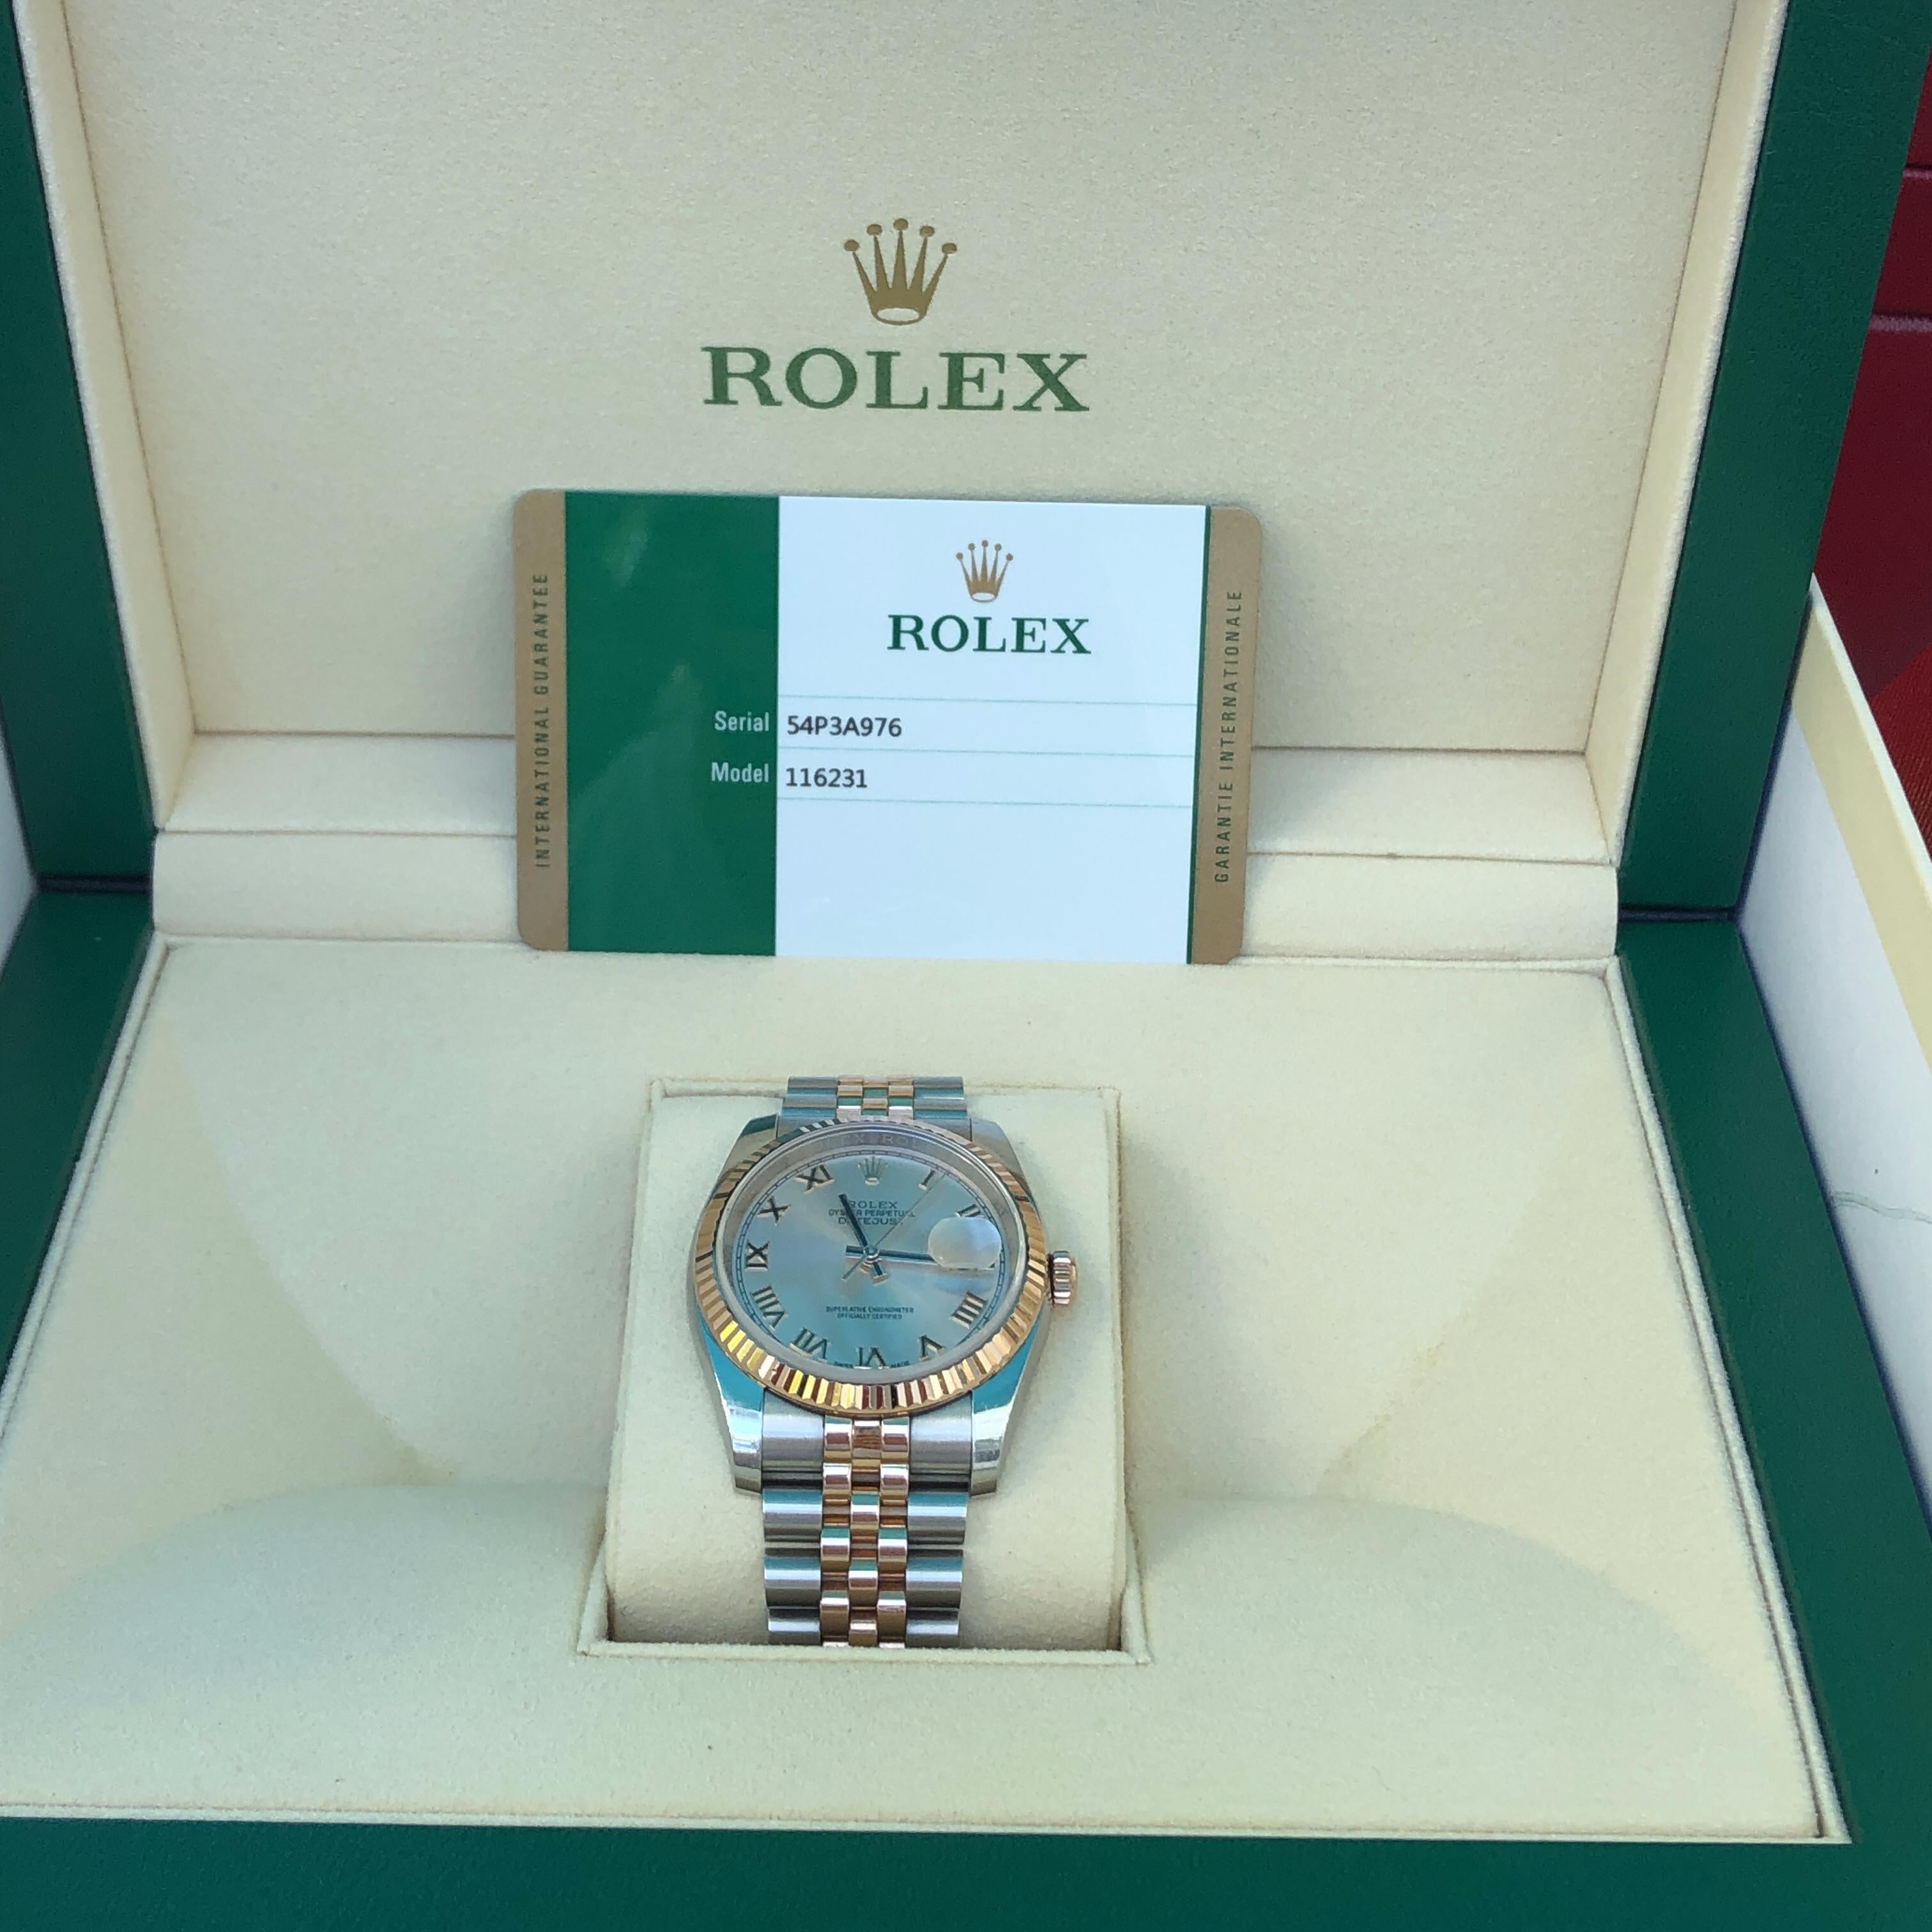 Rolex Concentric Dial Roulette Auto Datejust 36mm Steel Gold Men's Watch 116231

Rolex Datejust in Stainless Steel and 18K Rose Gold Ref# 116231. On Stainless Steel and 18K Rose Gold Jubilee bracelet with hidden folding clasp, 18K Rose Gold fluted